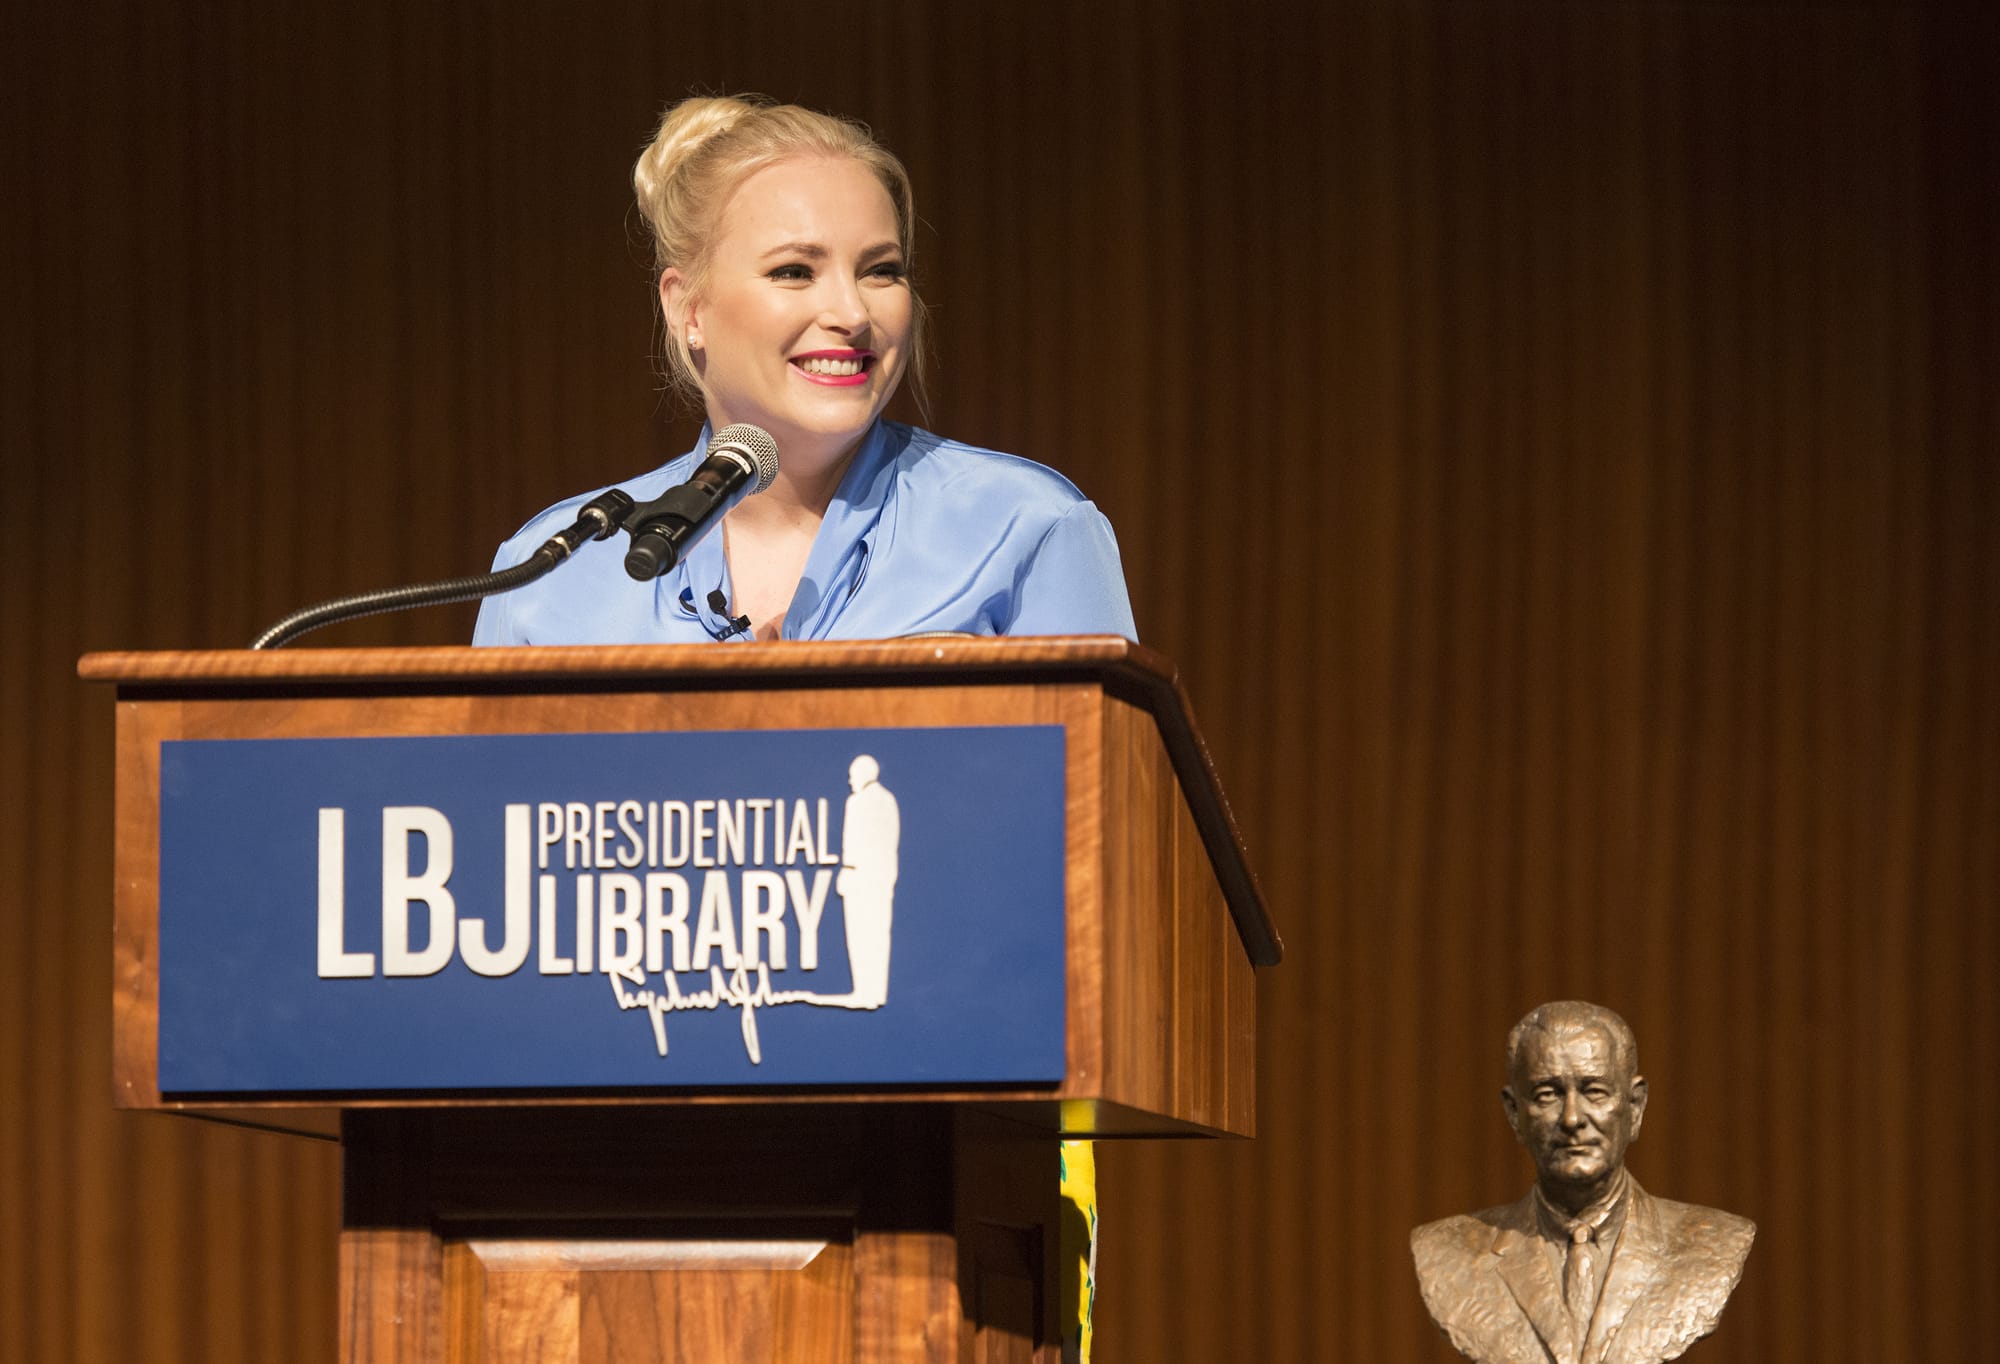 Meghan McCain accepts the LBJ Liberty & Justice for All Award on her father's behalf. LBJ Library photo by Jay Godwin.